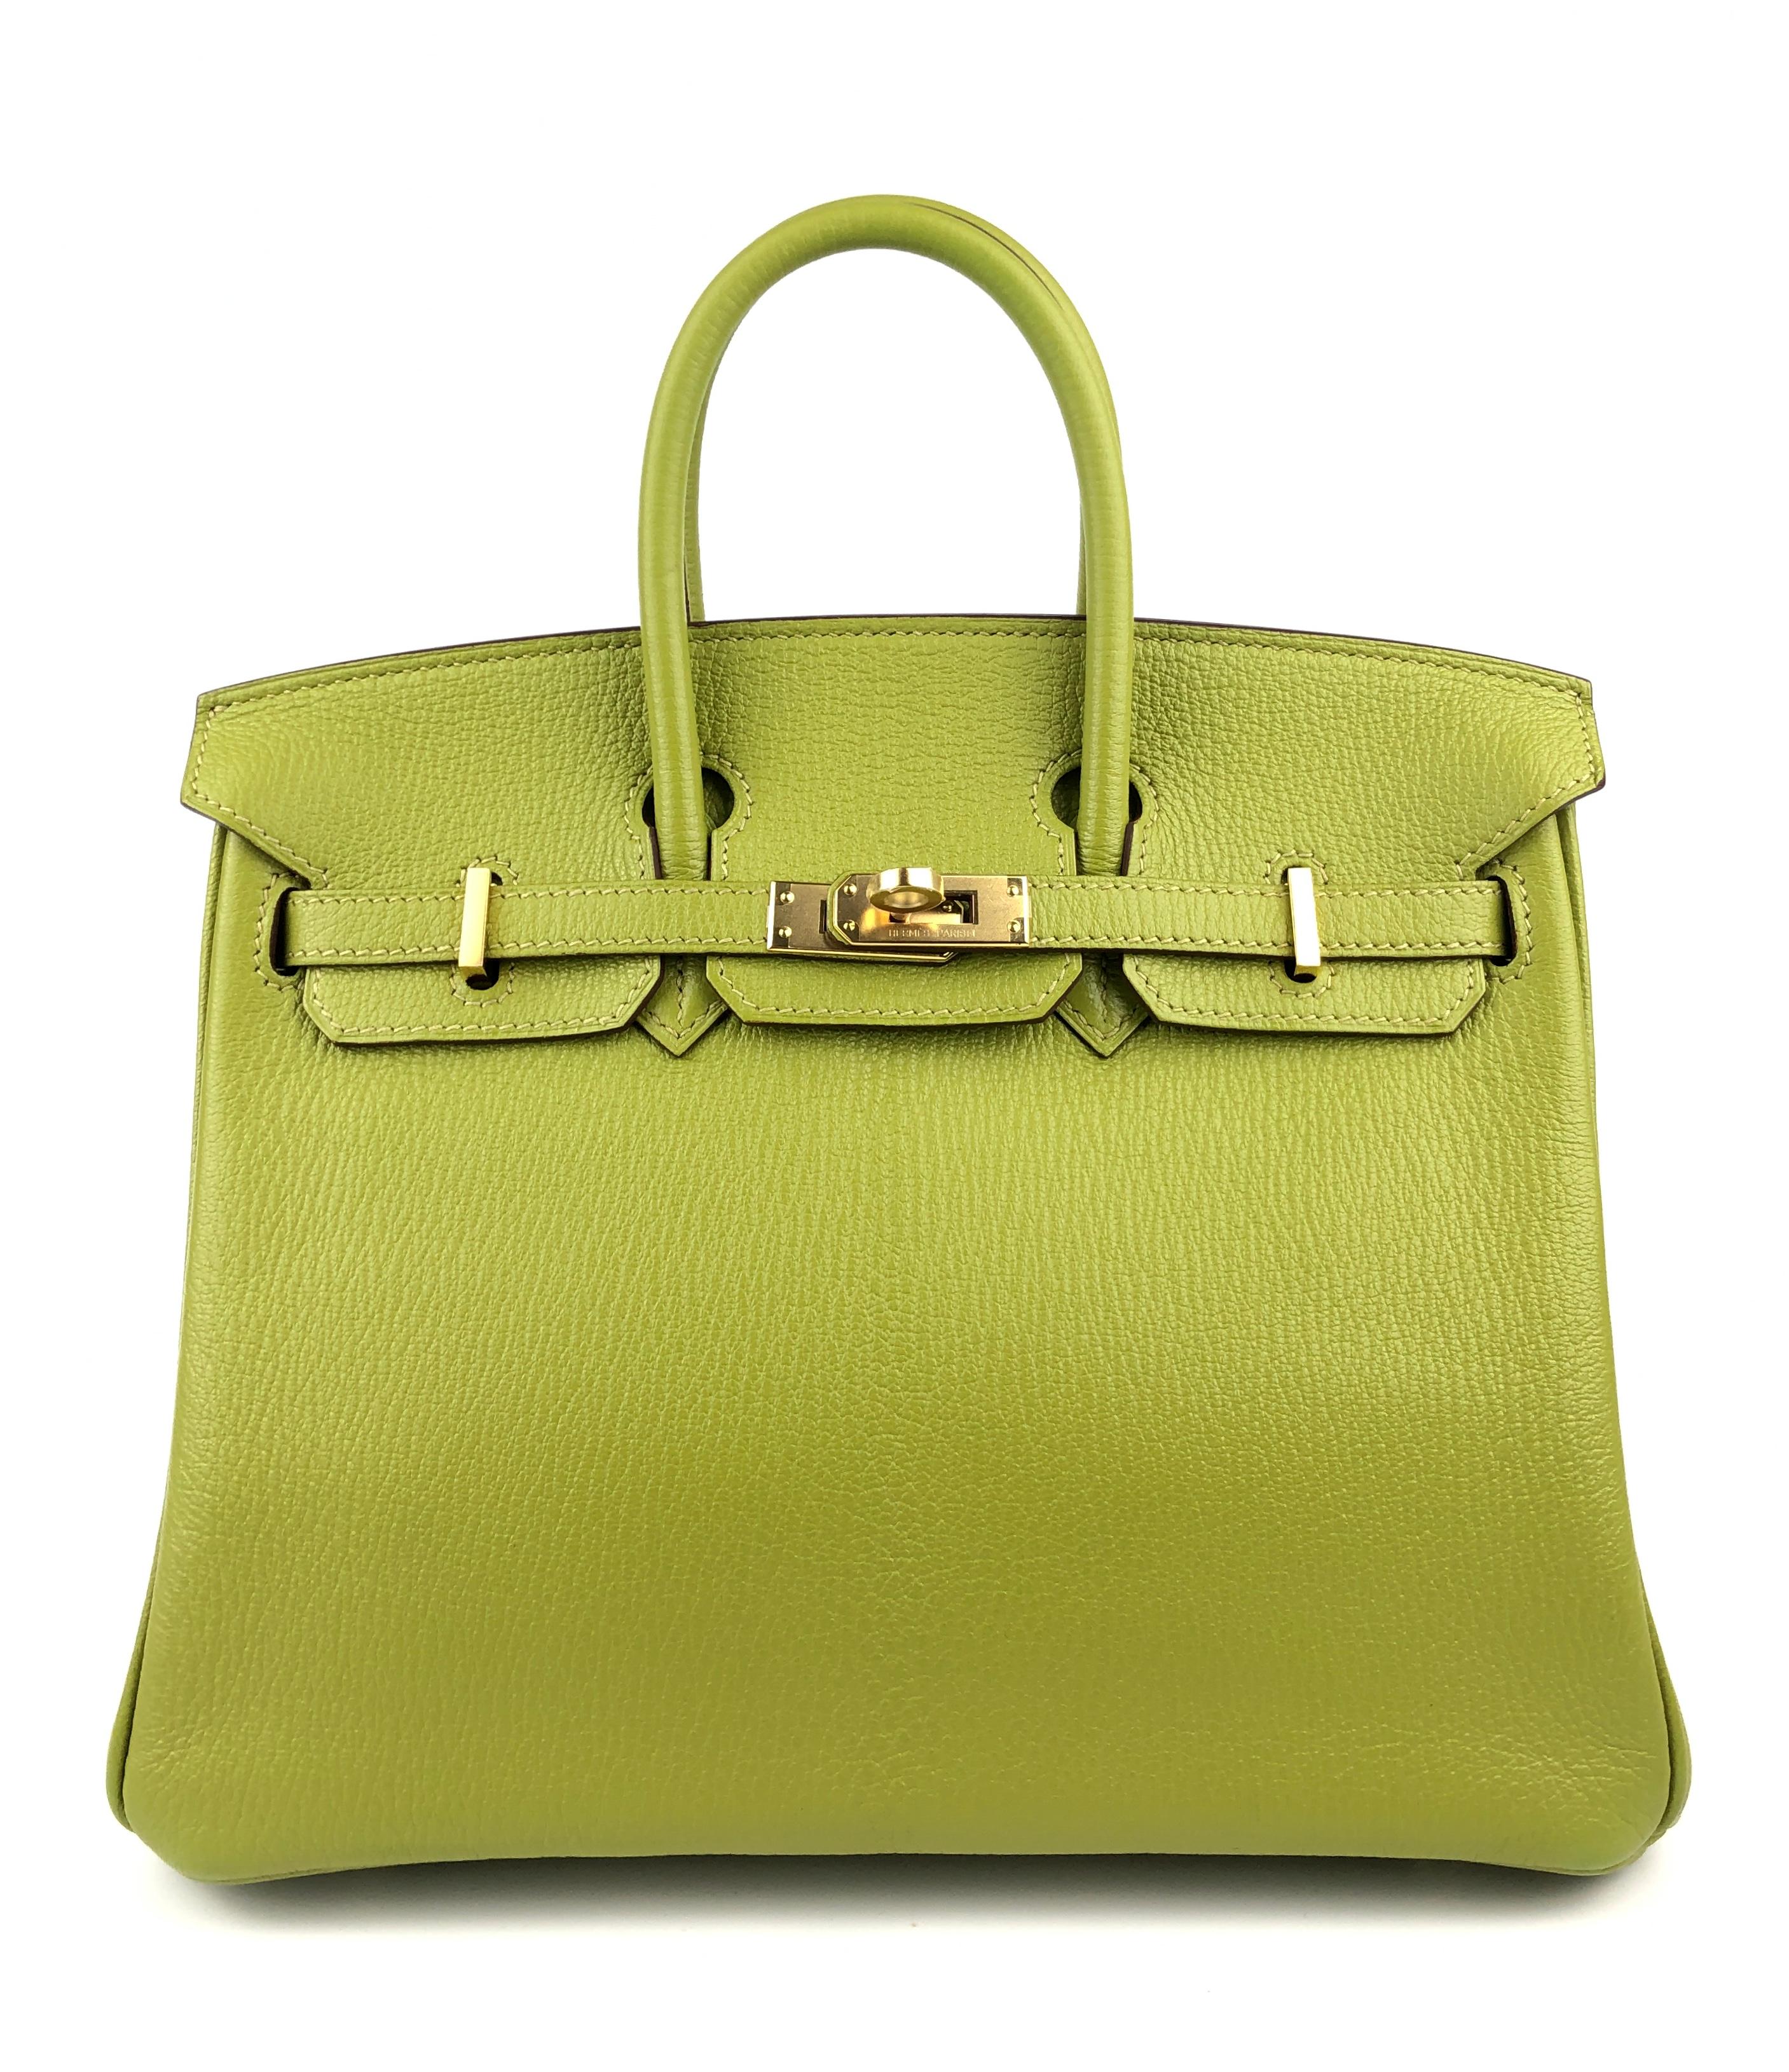 Very Rare and the Only ONE on eBay! Hermes Birkin 25 Vert Anis Green Chèvre Leather Gold Hardware. Like New Condition with Plastic on Hardware and feet, perfect corners and structure. 

Shop With Confidence from Lux Addicts. Authenticity Guaranteed!